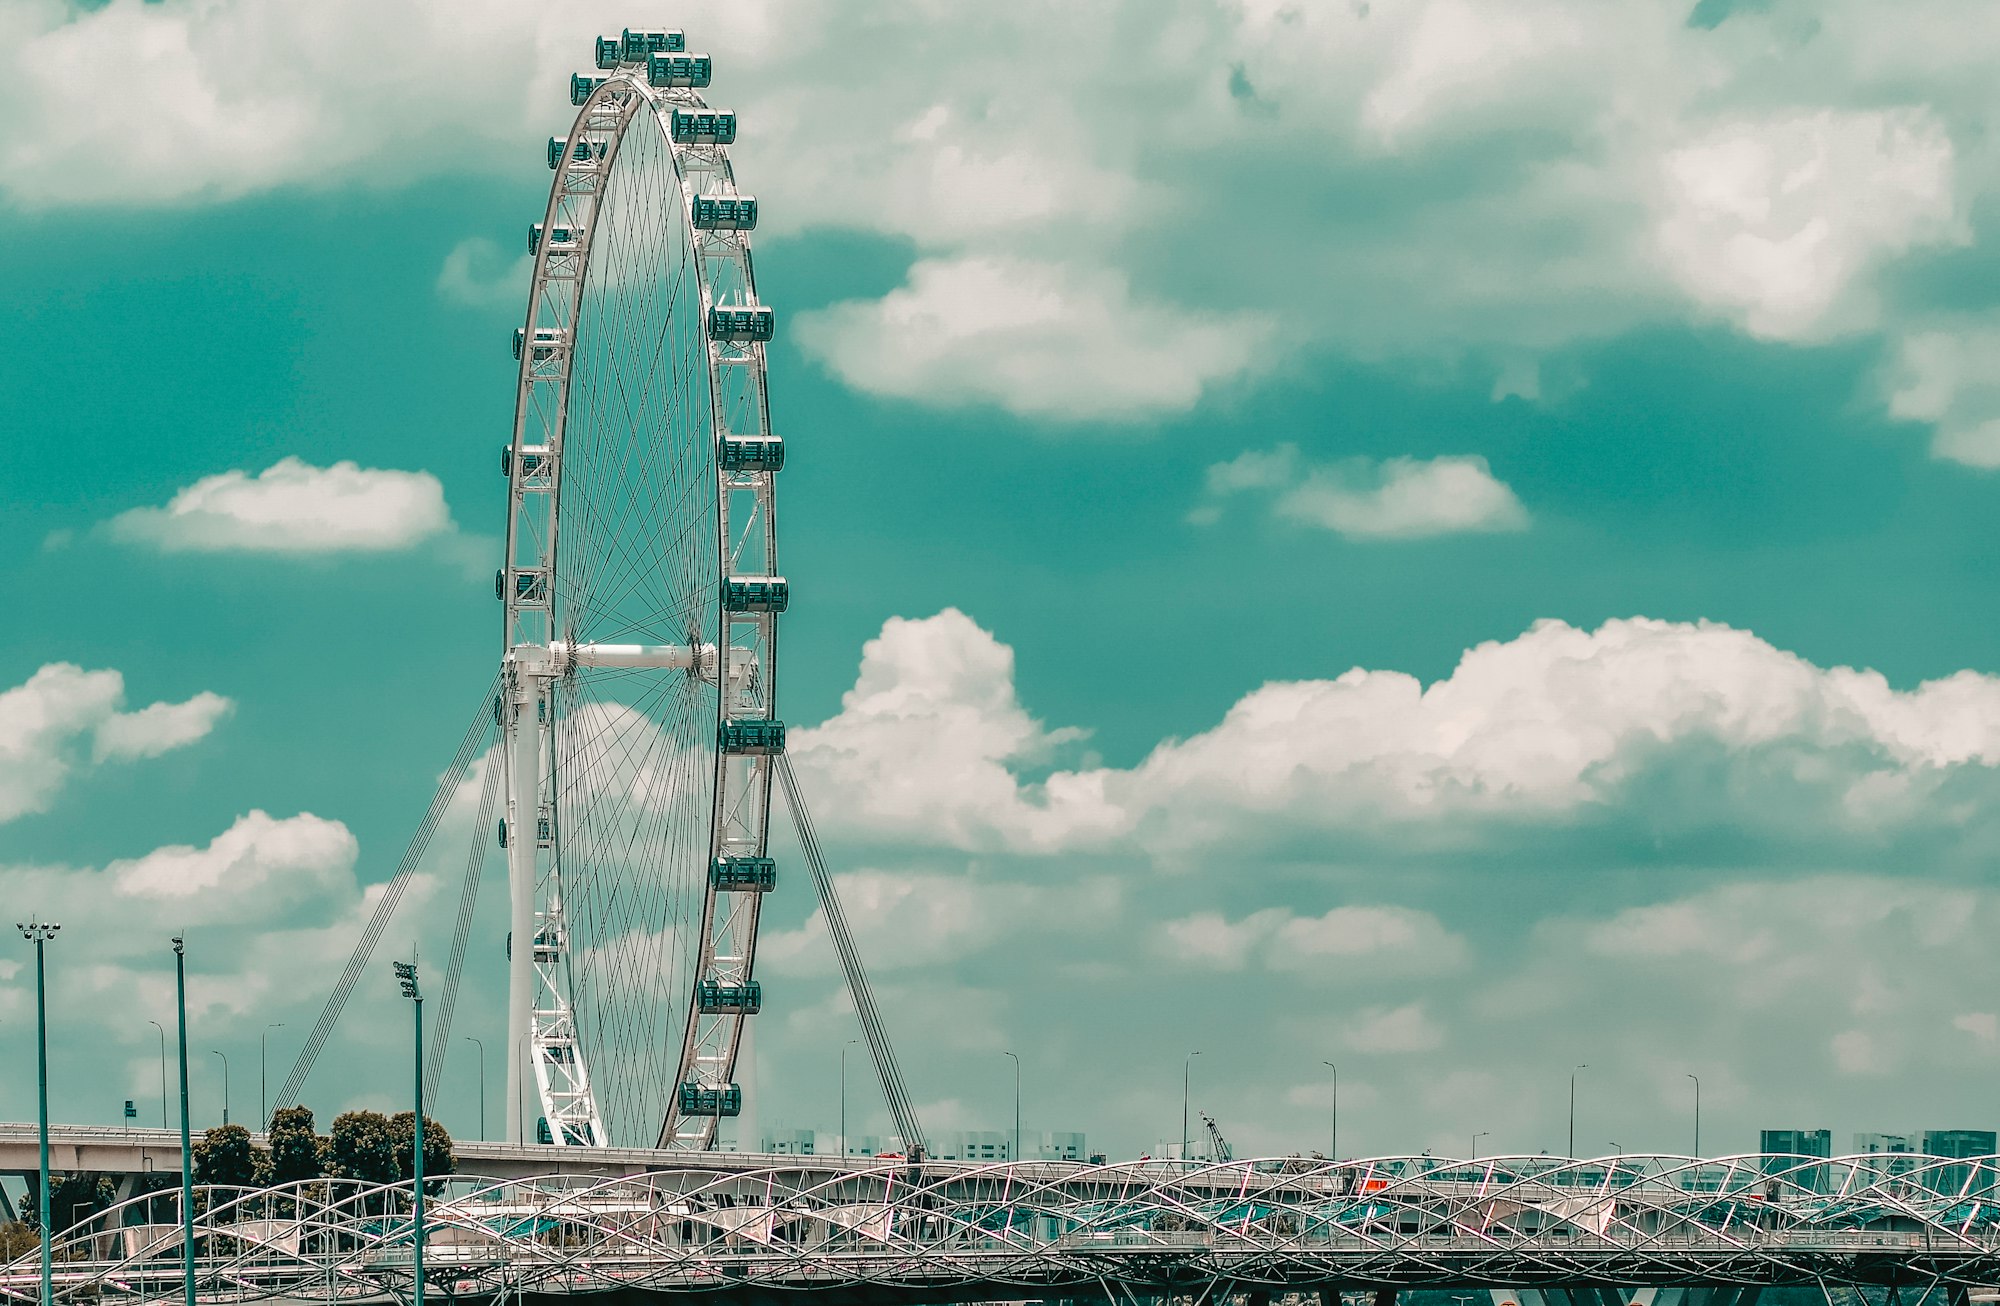 white and gray bridge under cloudy sky during daytime